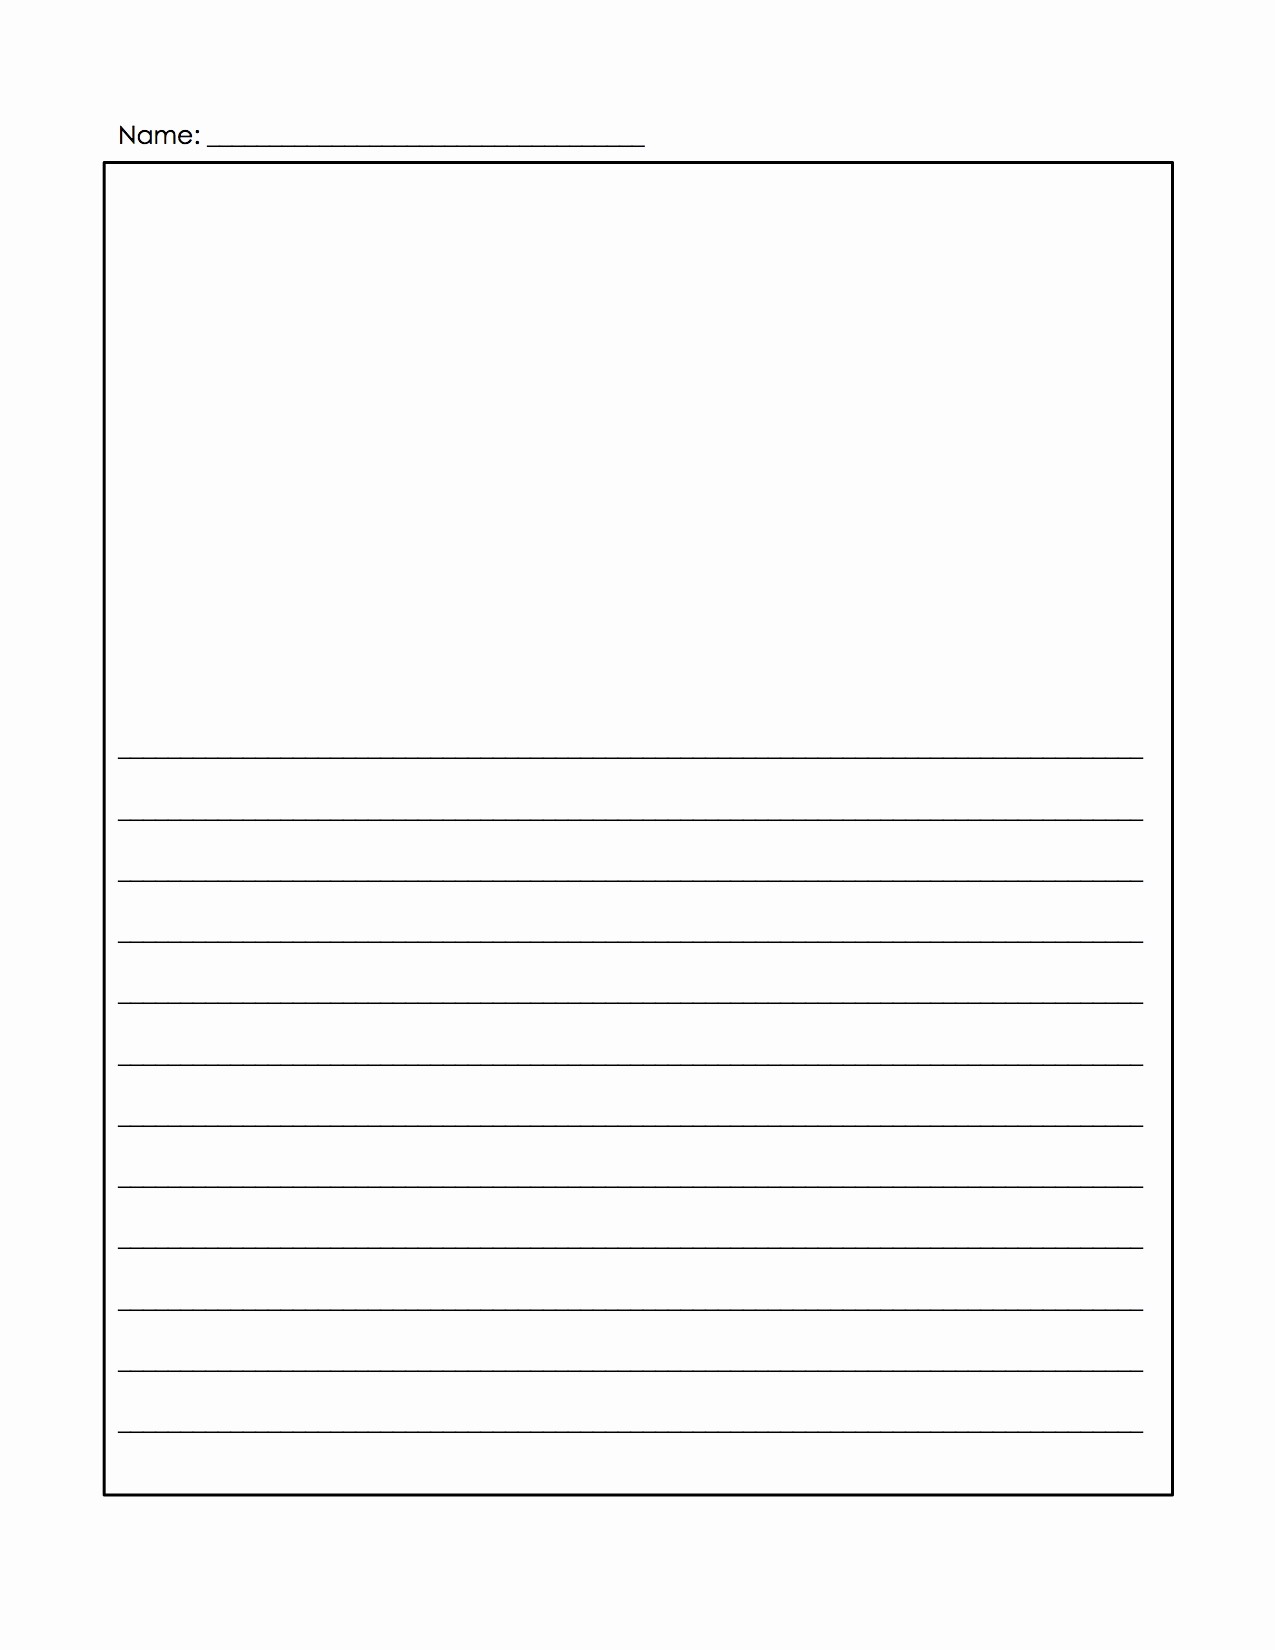 Microsoft Word Lined Paper Template Unique 14 Lined Paper Templates Excel Pdf formats